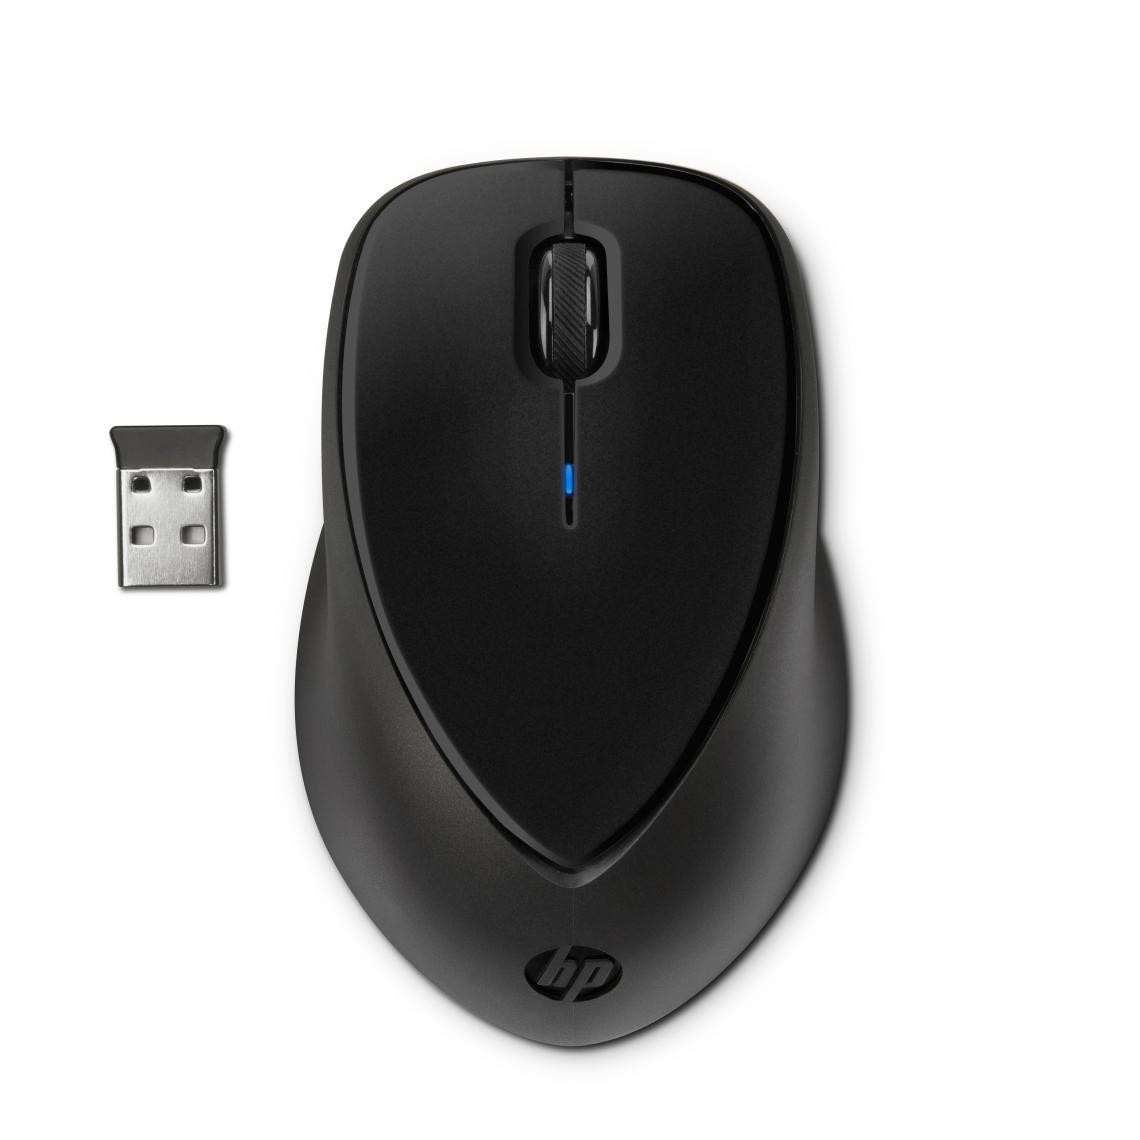 Hp - HP Comfort Grip Wireless mouse - Souris